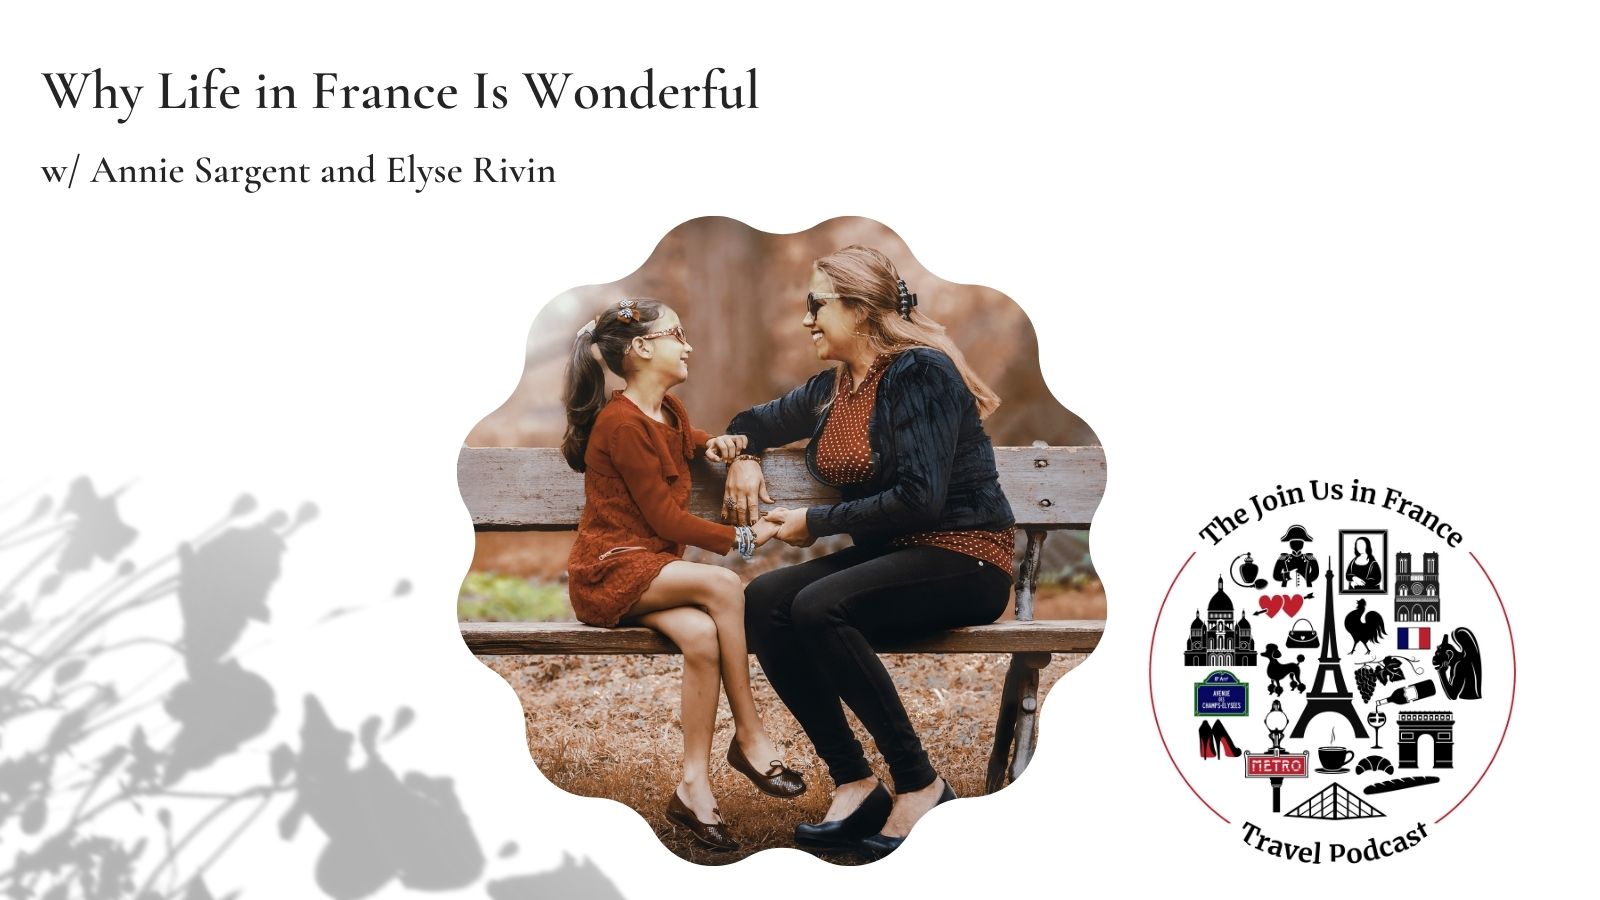 Woman and girl sitting on a park bench and conversing happily: Why life in France is wonderful episode